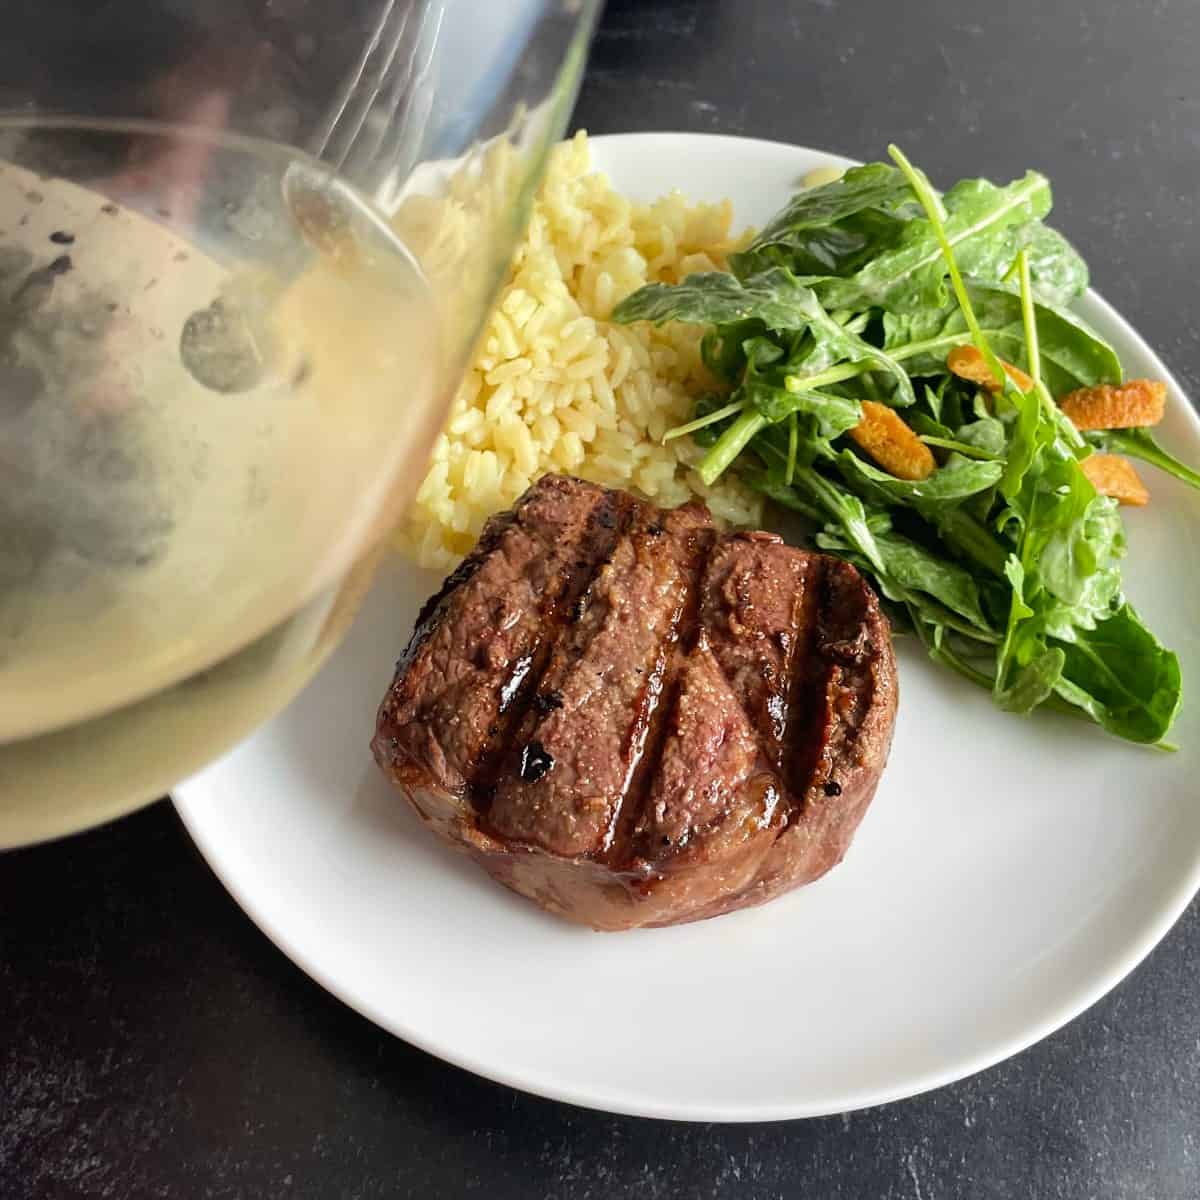 grilled filet mignon on a white plate with green salad and rice. A tilted glass of white wine off to the side.